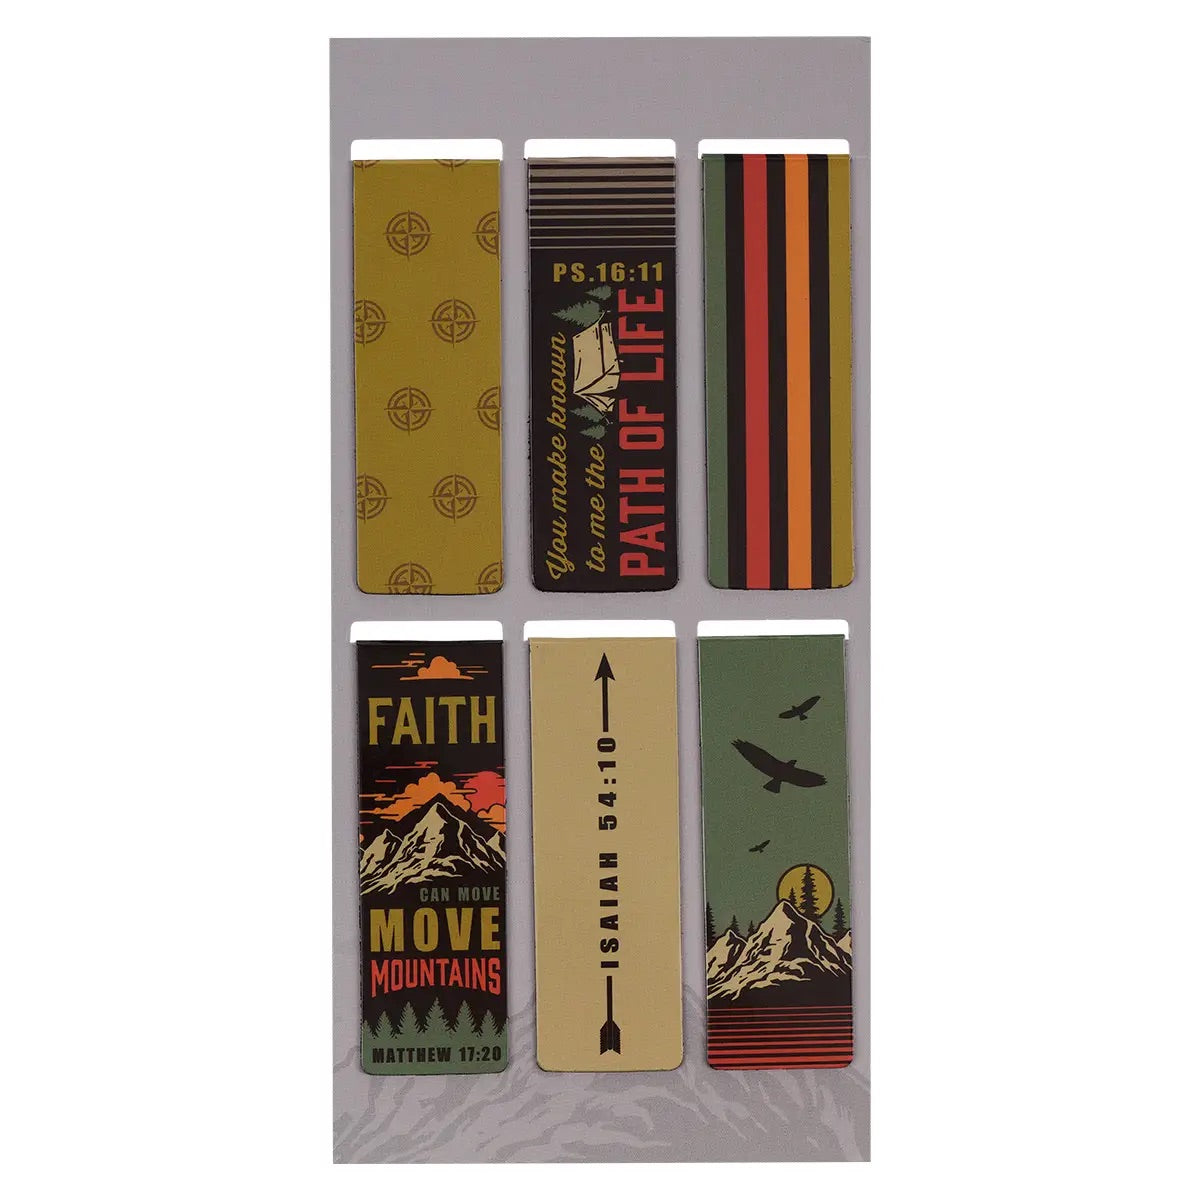 Magnetic Bookmark Set Path of Life